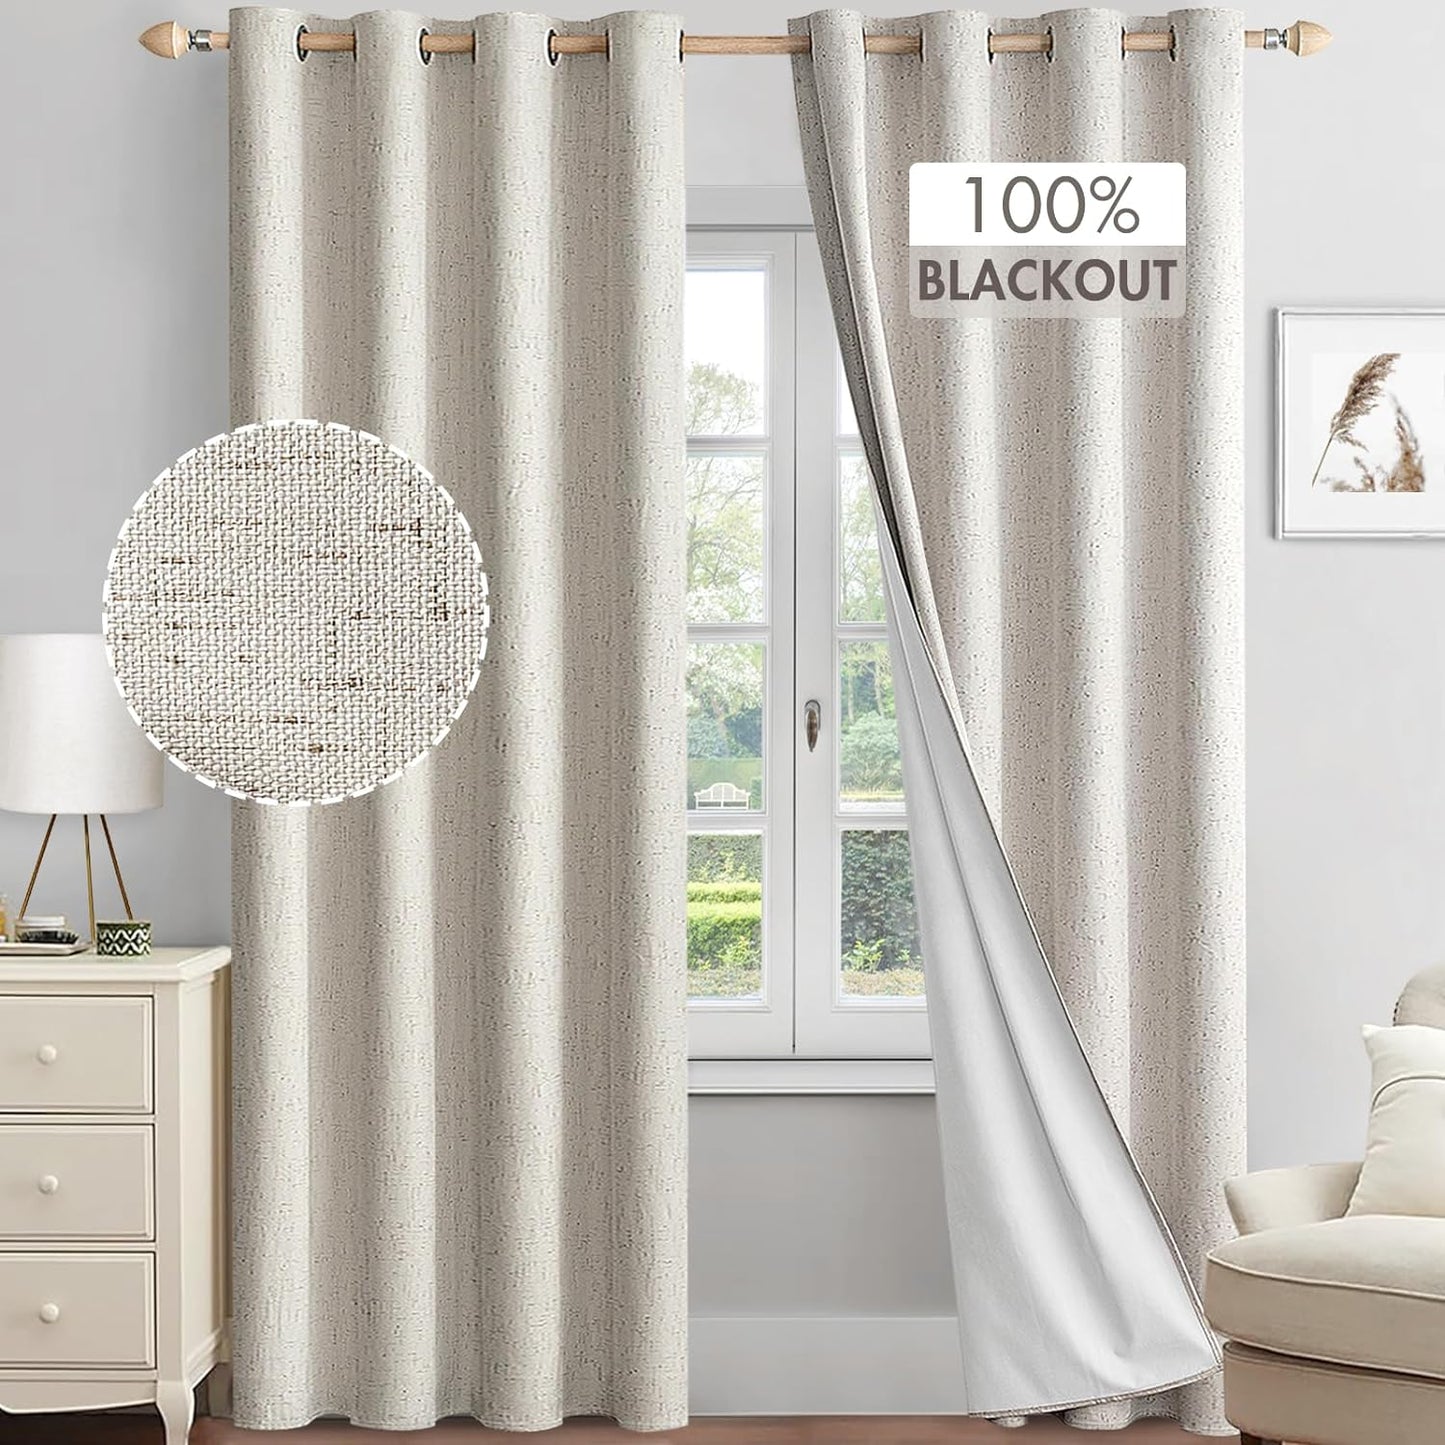 MIULEE Linen Textured 100% Blackout Curtains for Bedroom 84 Inches Long Natural Beige Thermal Insulated Black Out Curtains/Draperies with White Liner for Living Room/Nursery, Grommet Top, 2 Panels  MIULEE Ivory W52Xl80 